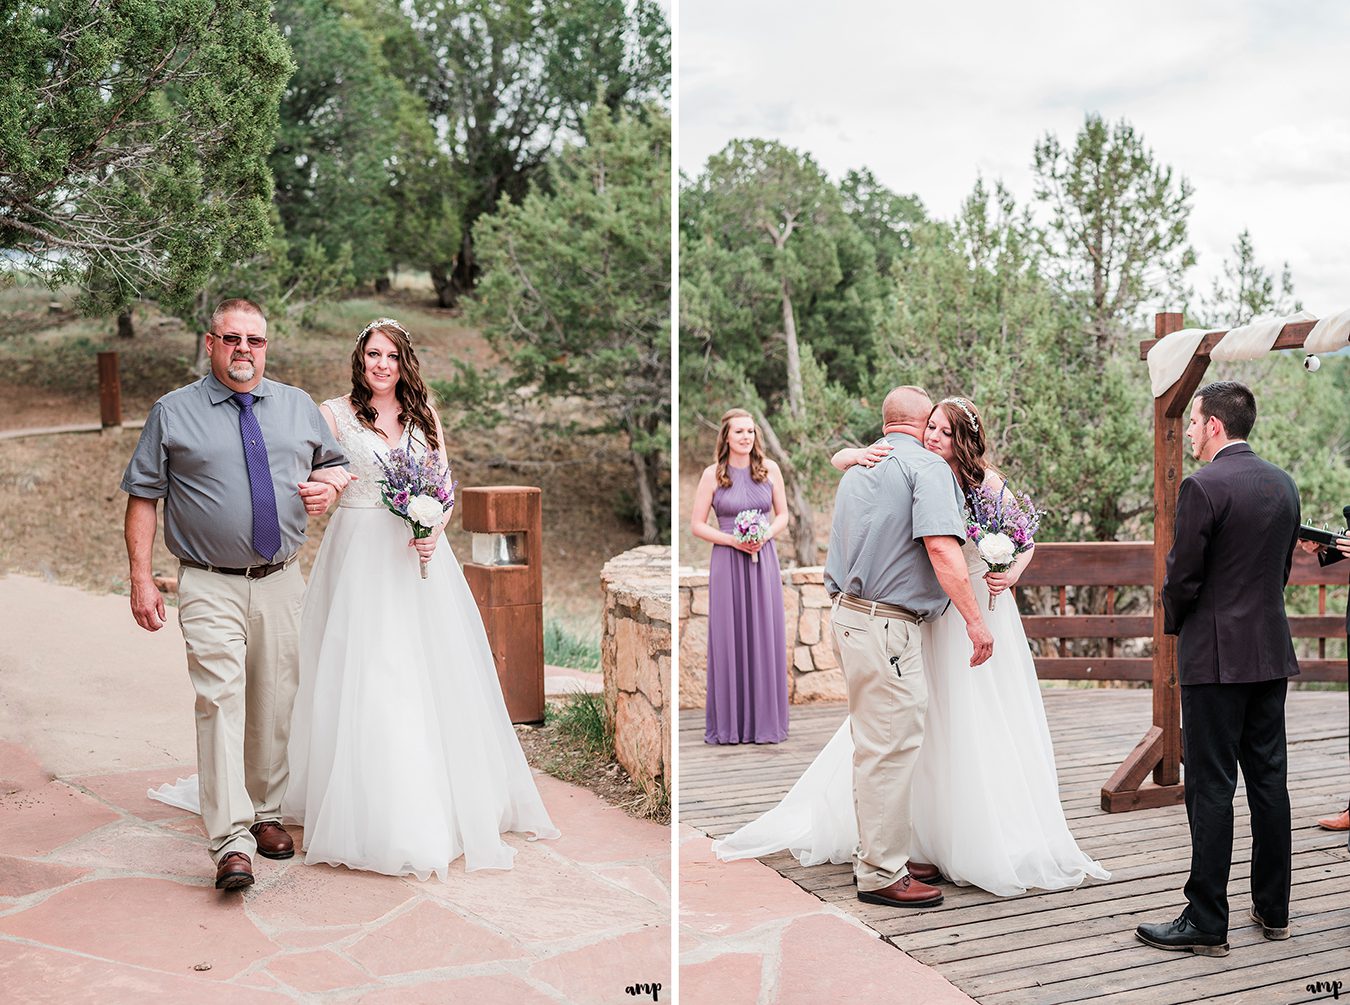 Erica's father gives her away during their elopement at Ridgway State Park